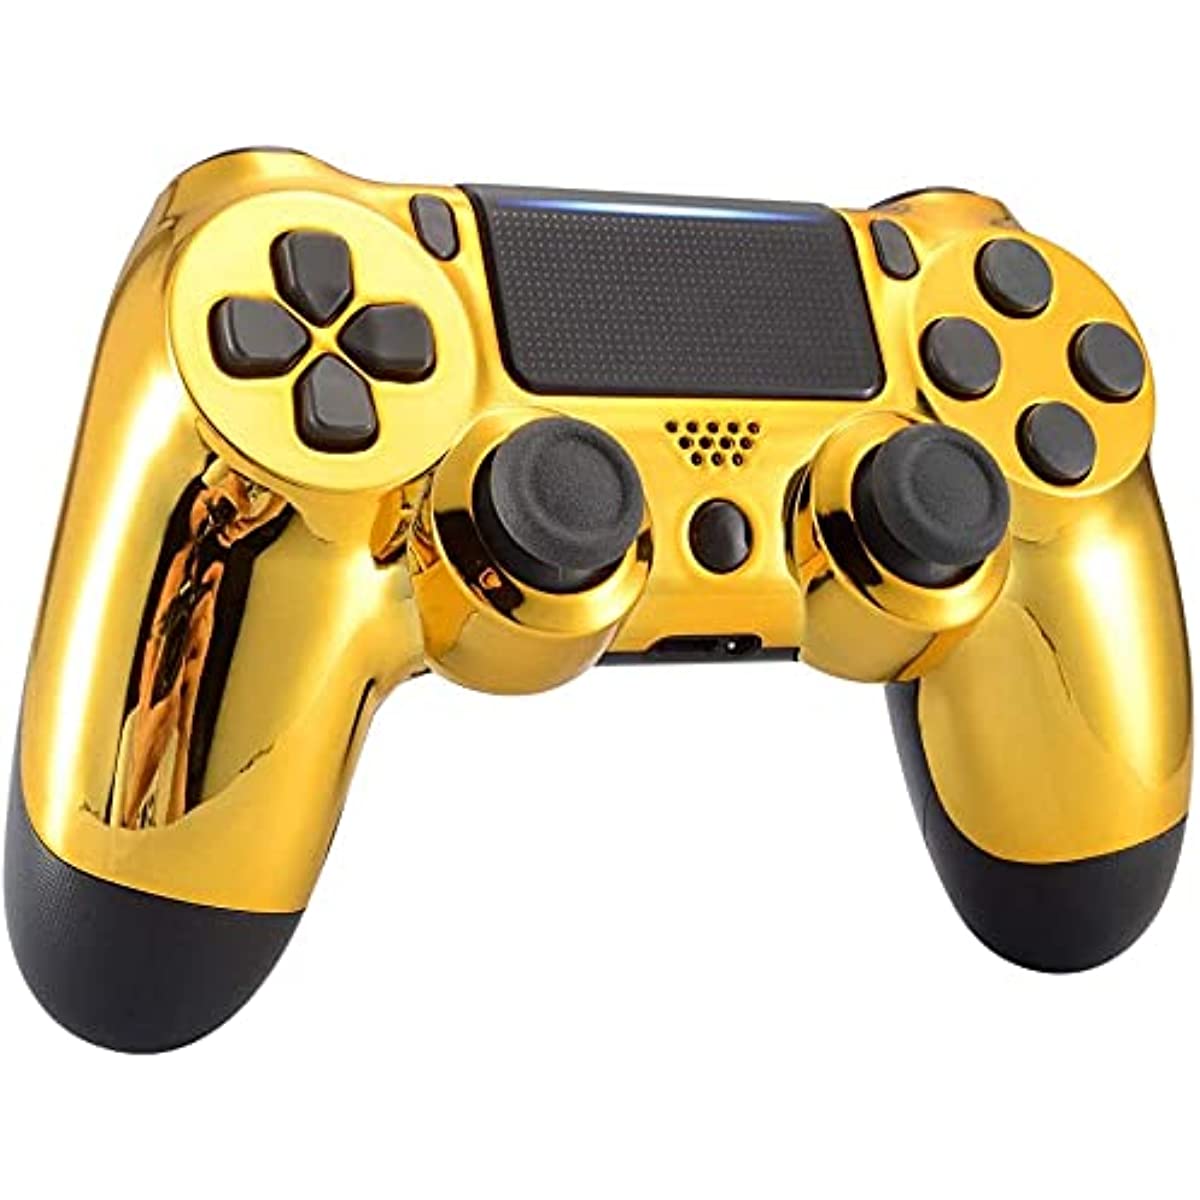 iABC Chrome Gold Playstation 4 PS4 Shock 4 Controller – SSD